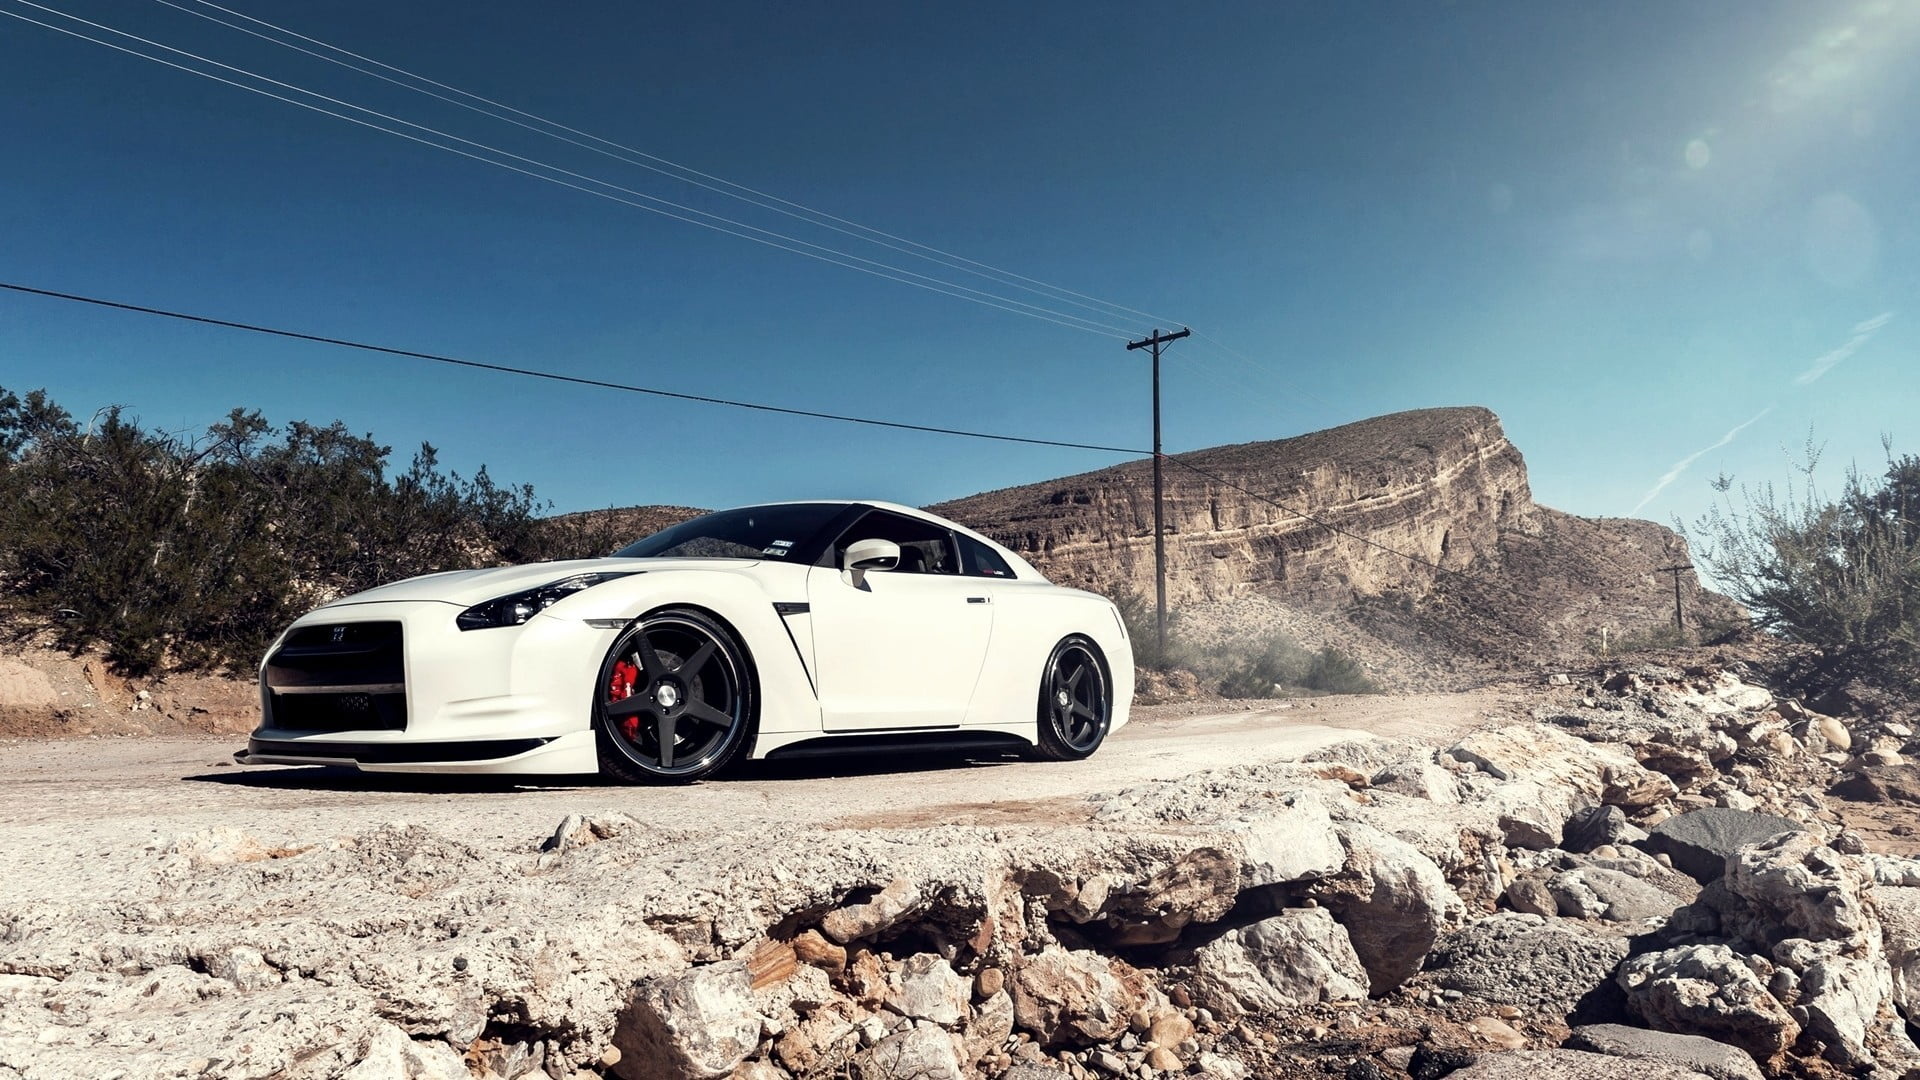 Nissan GT-R sports car, Iconic white color, Skyline heritage, Exhilarating driving experience, 1920x1080 Full HD Desktop